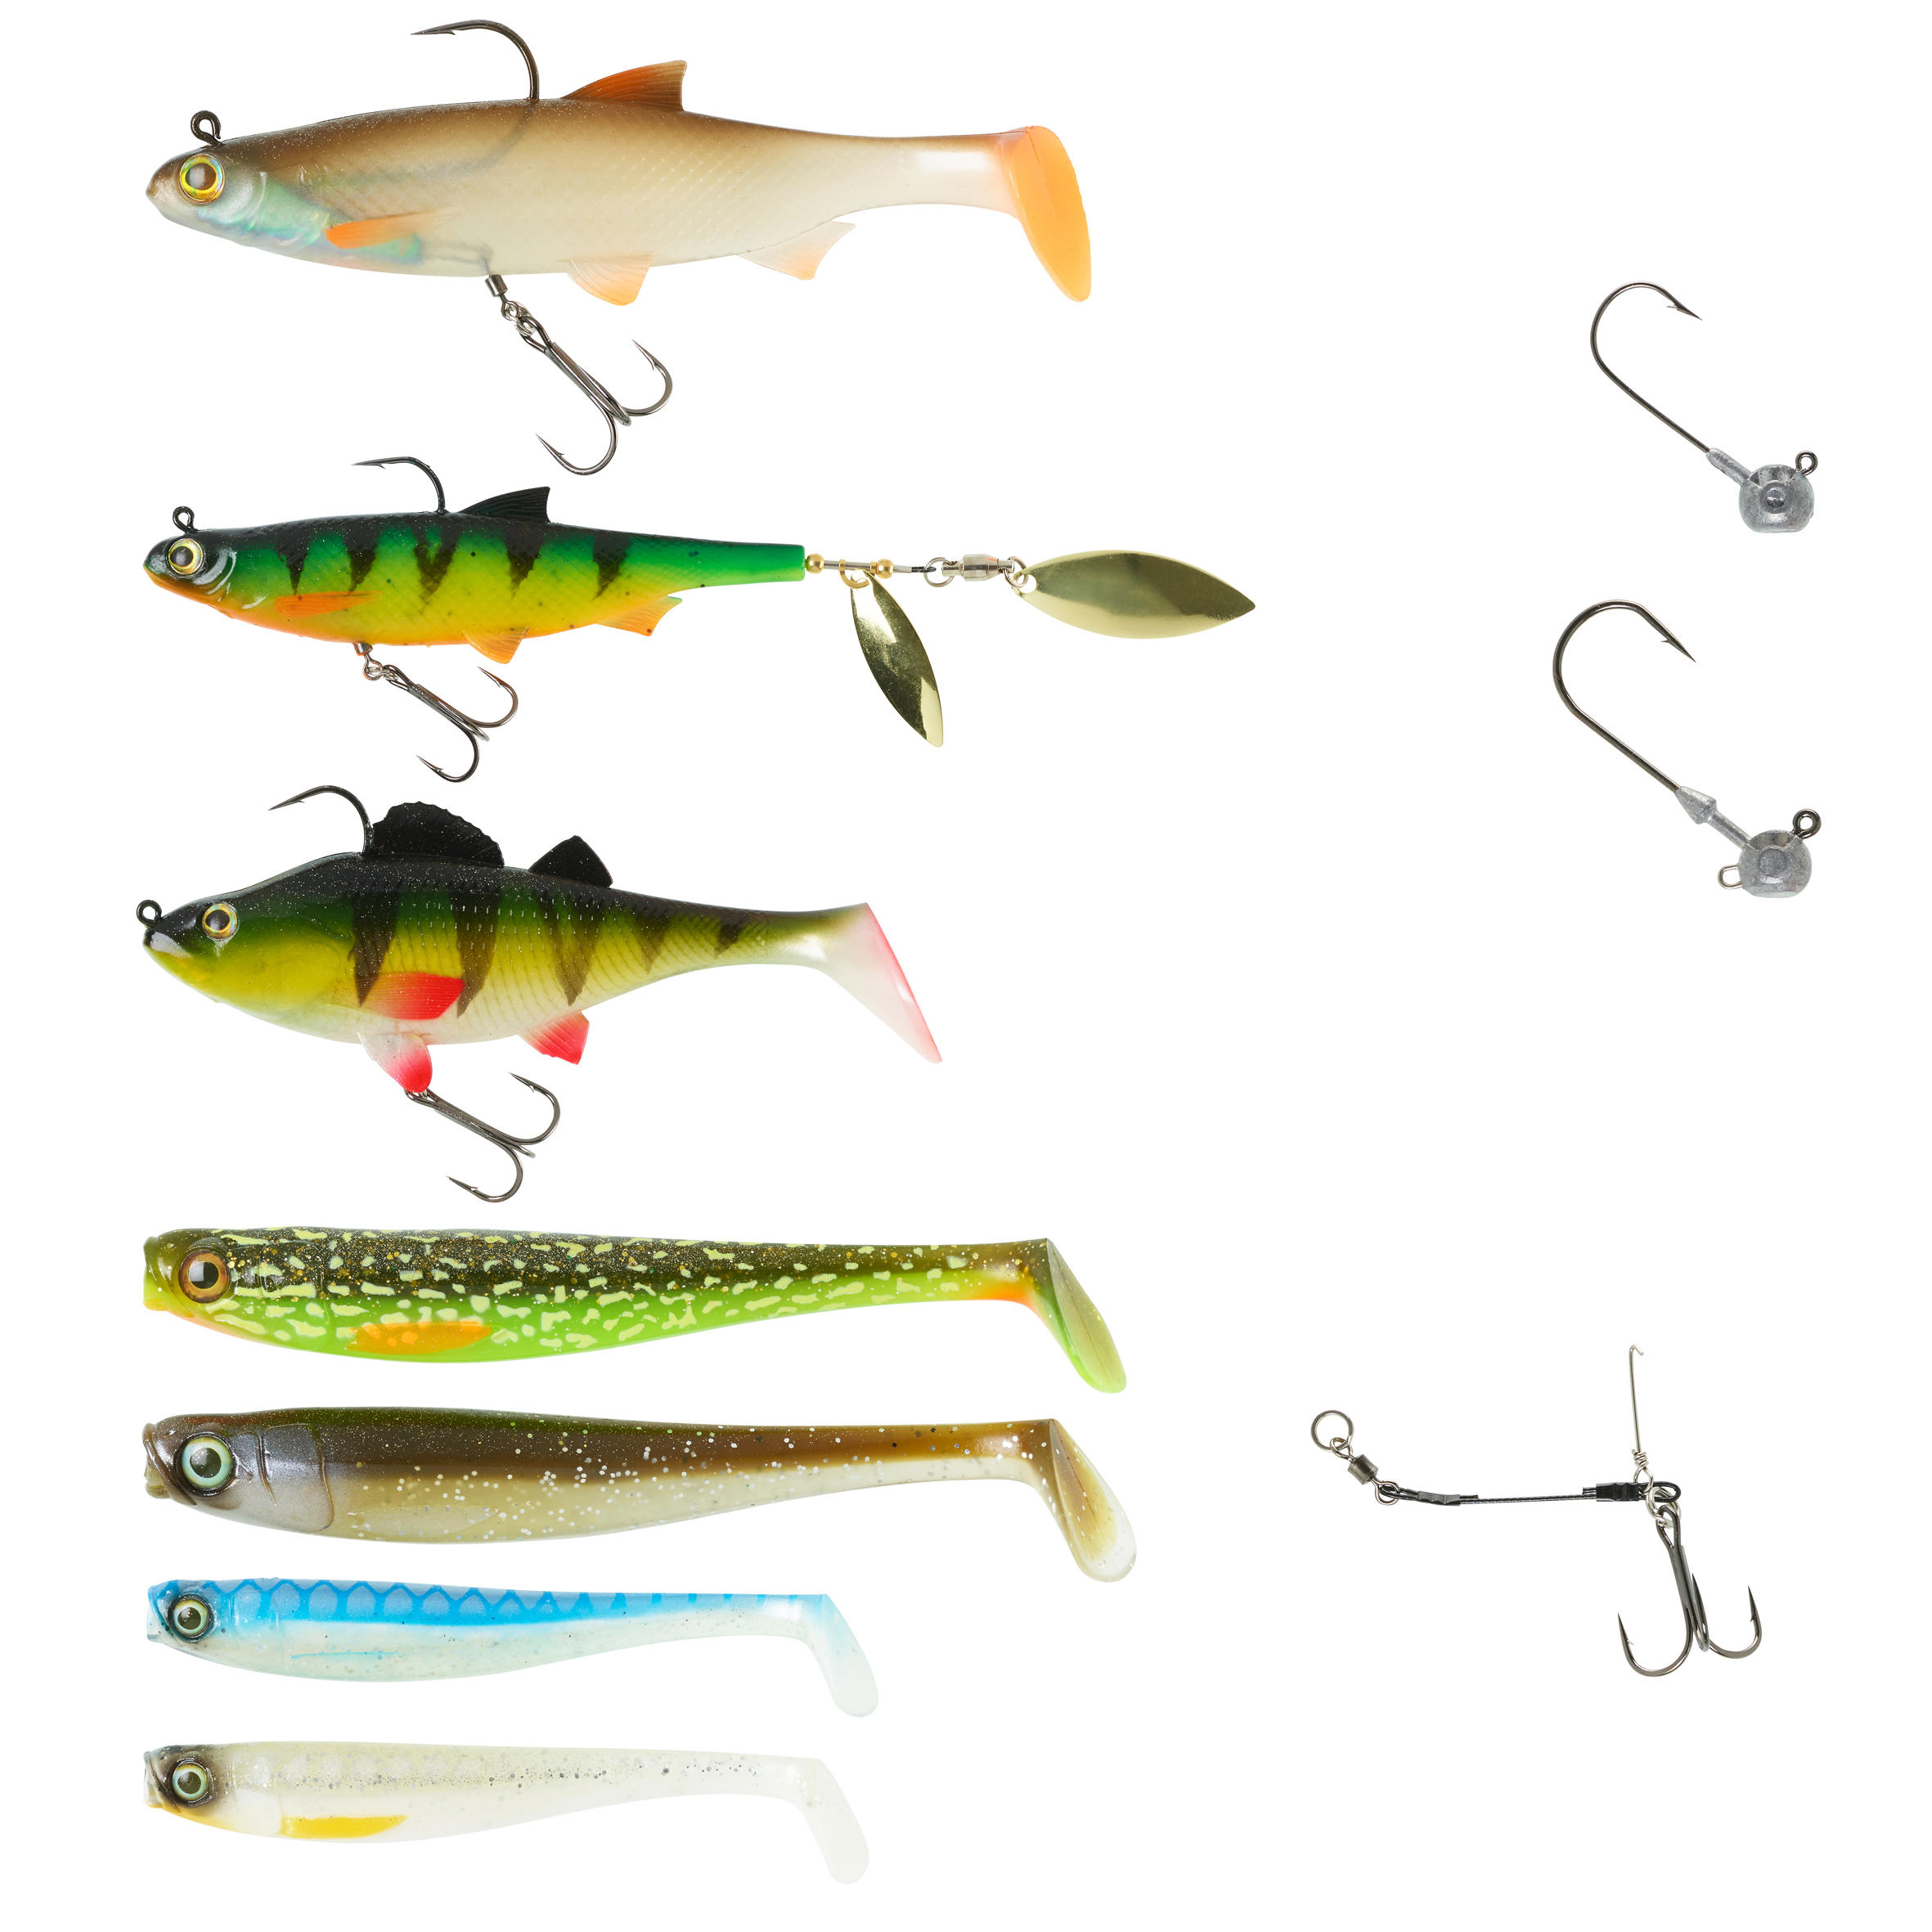 LURE FISHING SOFT LURES BOXSB PRCH - Fluo orange, Fluo yellow